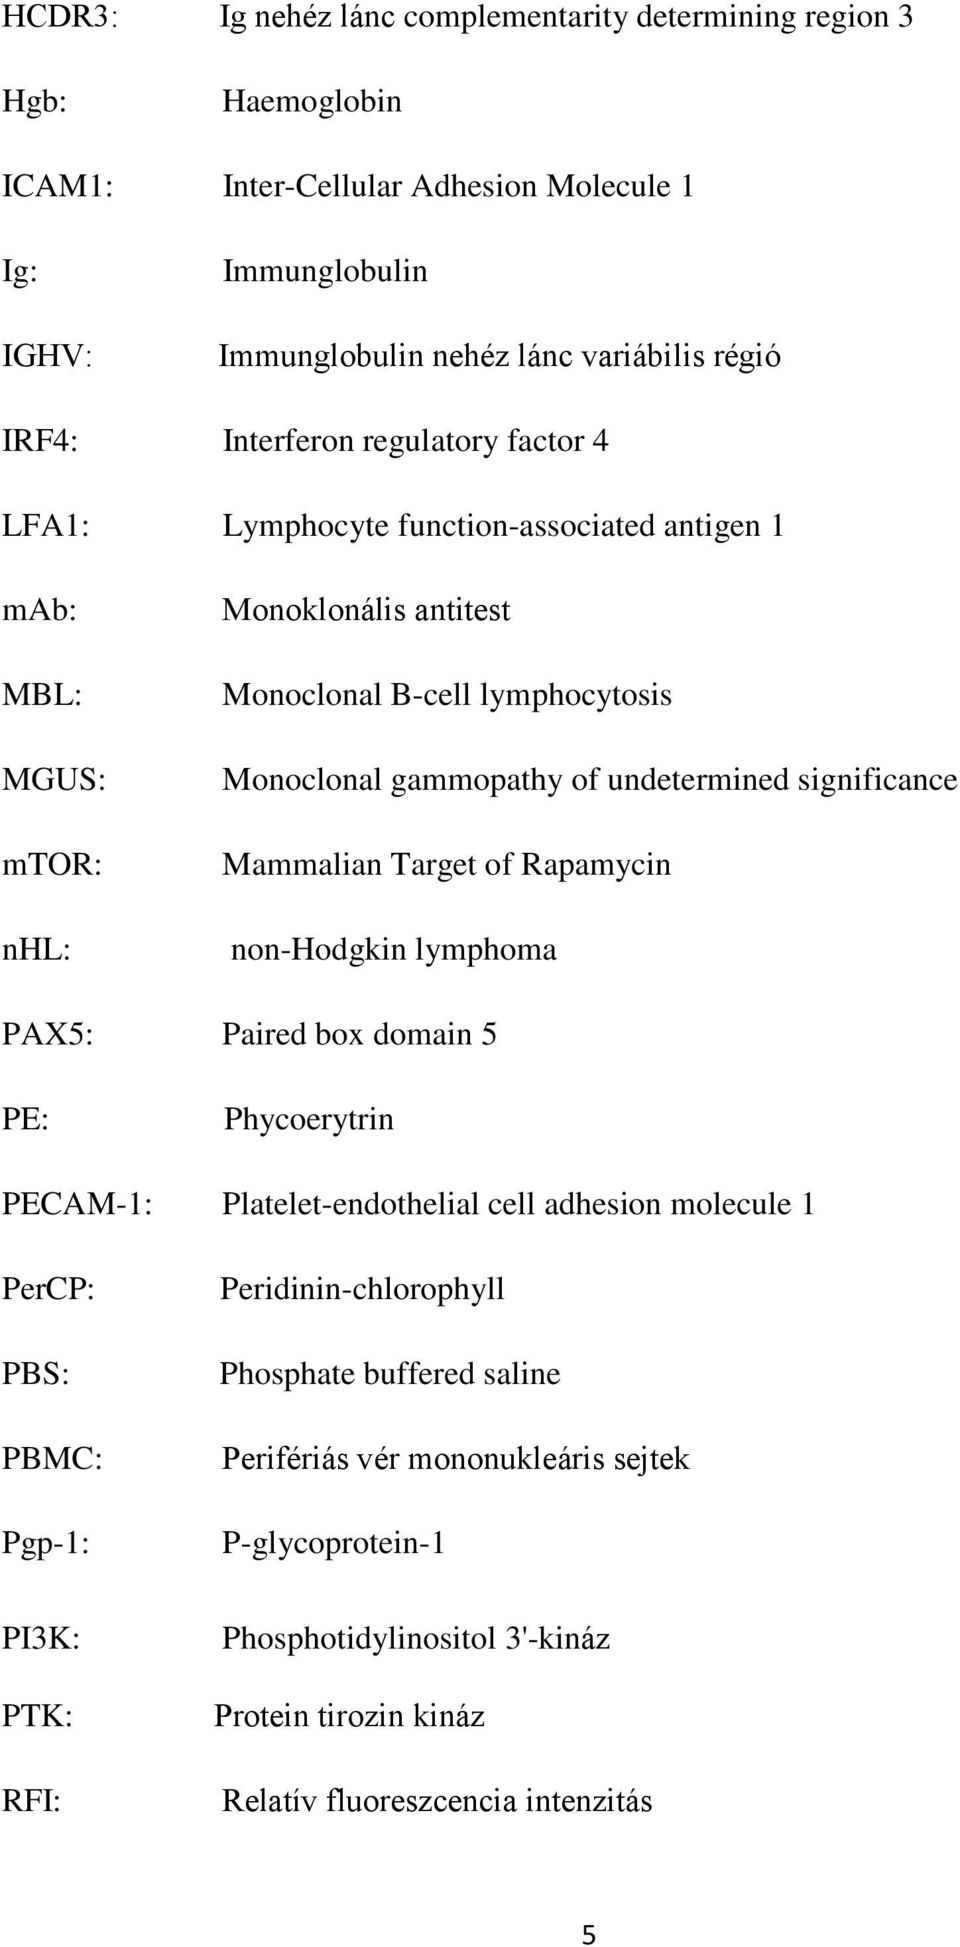 undetermined significance Mammalian Target of Rapamycin non-hodgkin lymphoma PAX5: Paired box domain 5 PE: Phycoerytrin PECAM-1: Platelet-endothelial cell adhesion molecule 1 PerCP: PBS: PBMC: